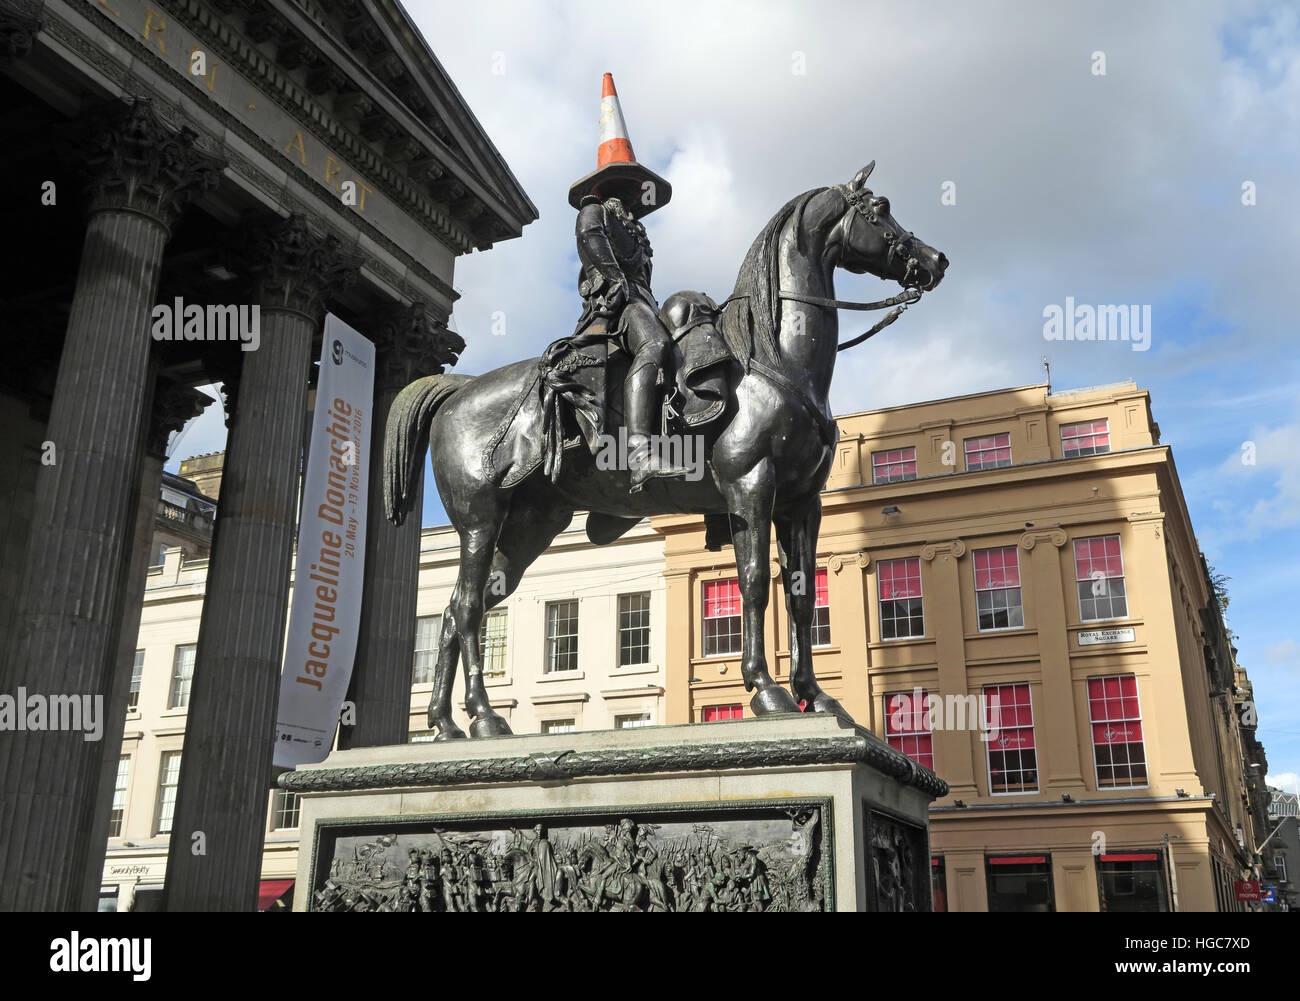 Equestrian statue of the Duke of Wellington, Glasgow, with traffic cone Stock Photo